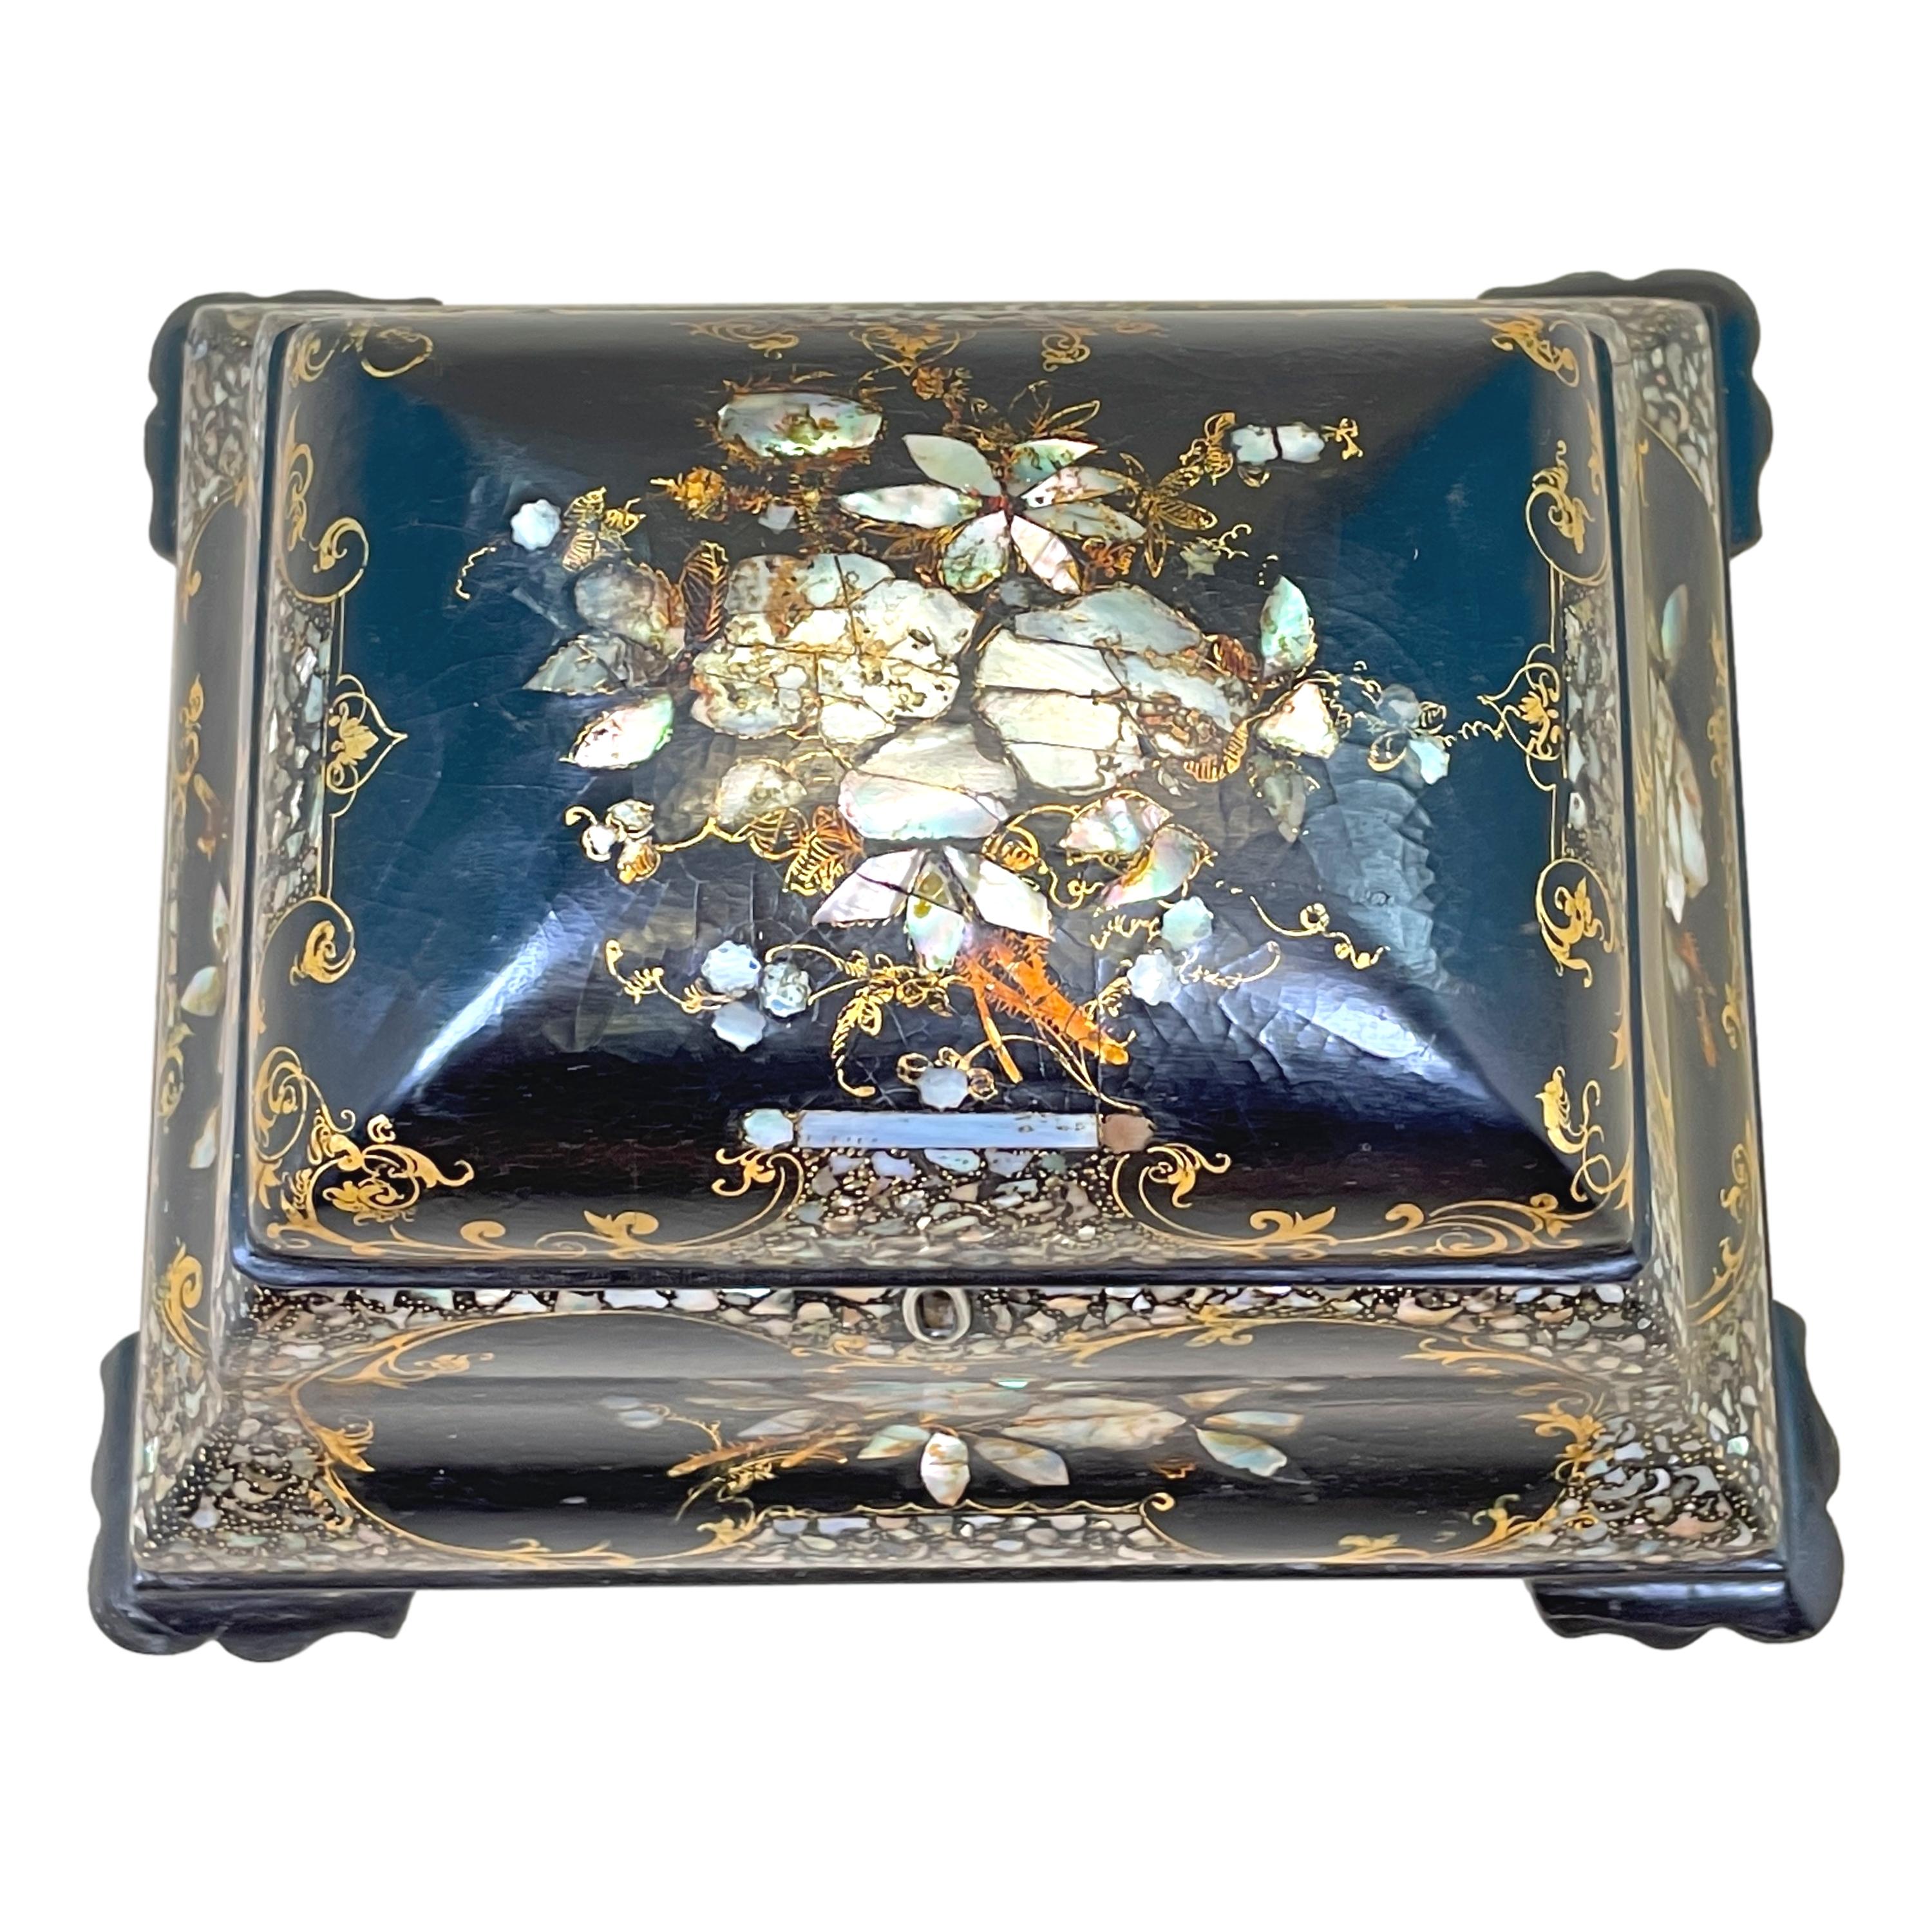 A very elegant mid-19th century papier mache tea caddy, of bombe type form, having exceptional hand painted and inlaid decoration, the hinged top enclosing lidded compartments raised on original shaped feet.

This charming little 19th century tea